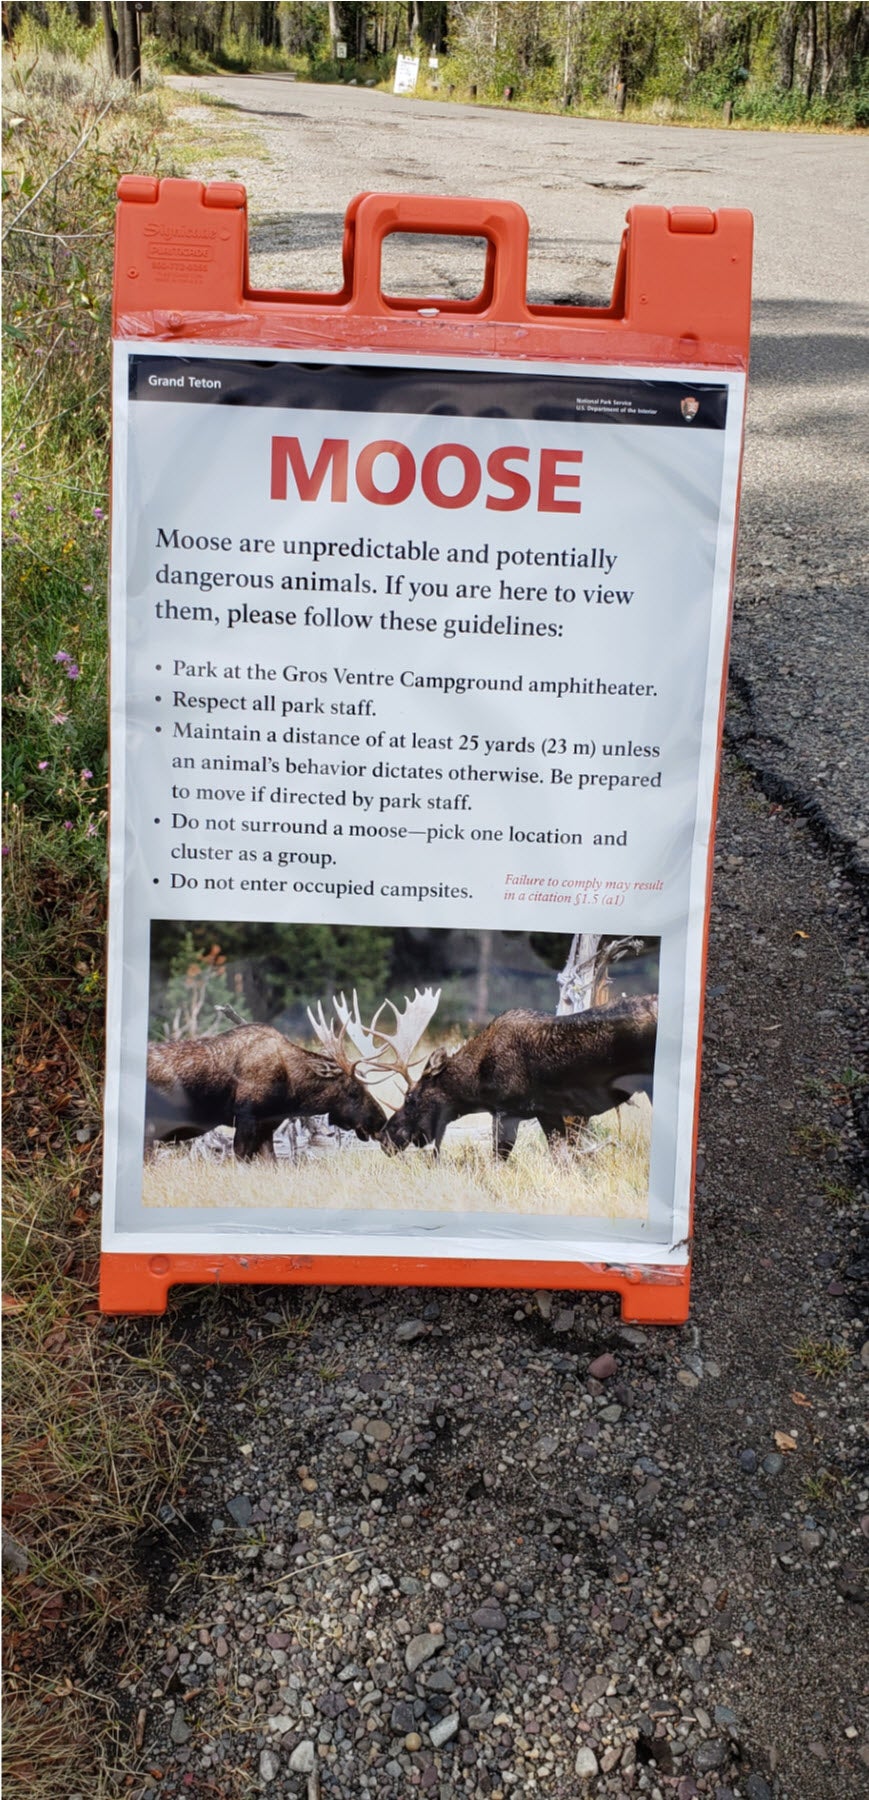 This is a good sign if you are looking to see Moose.